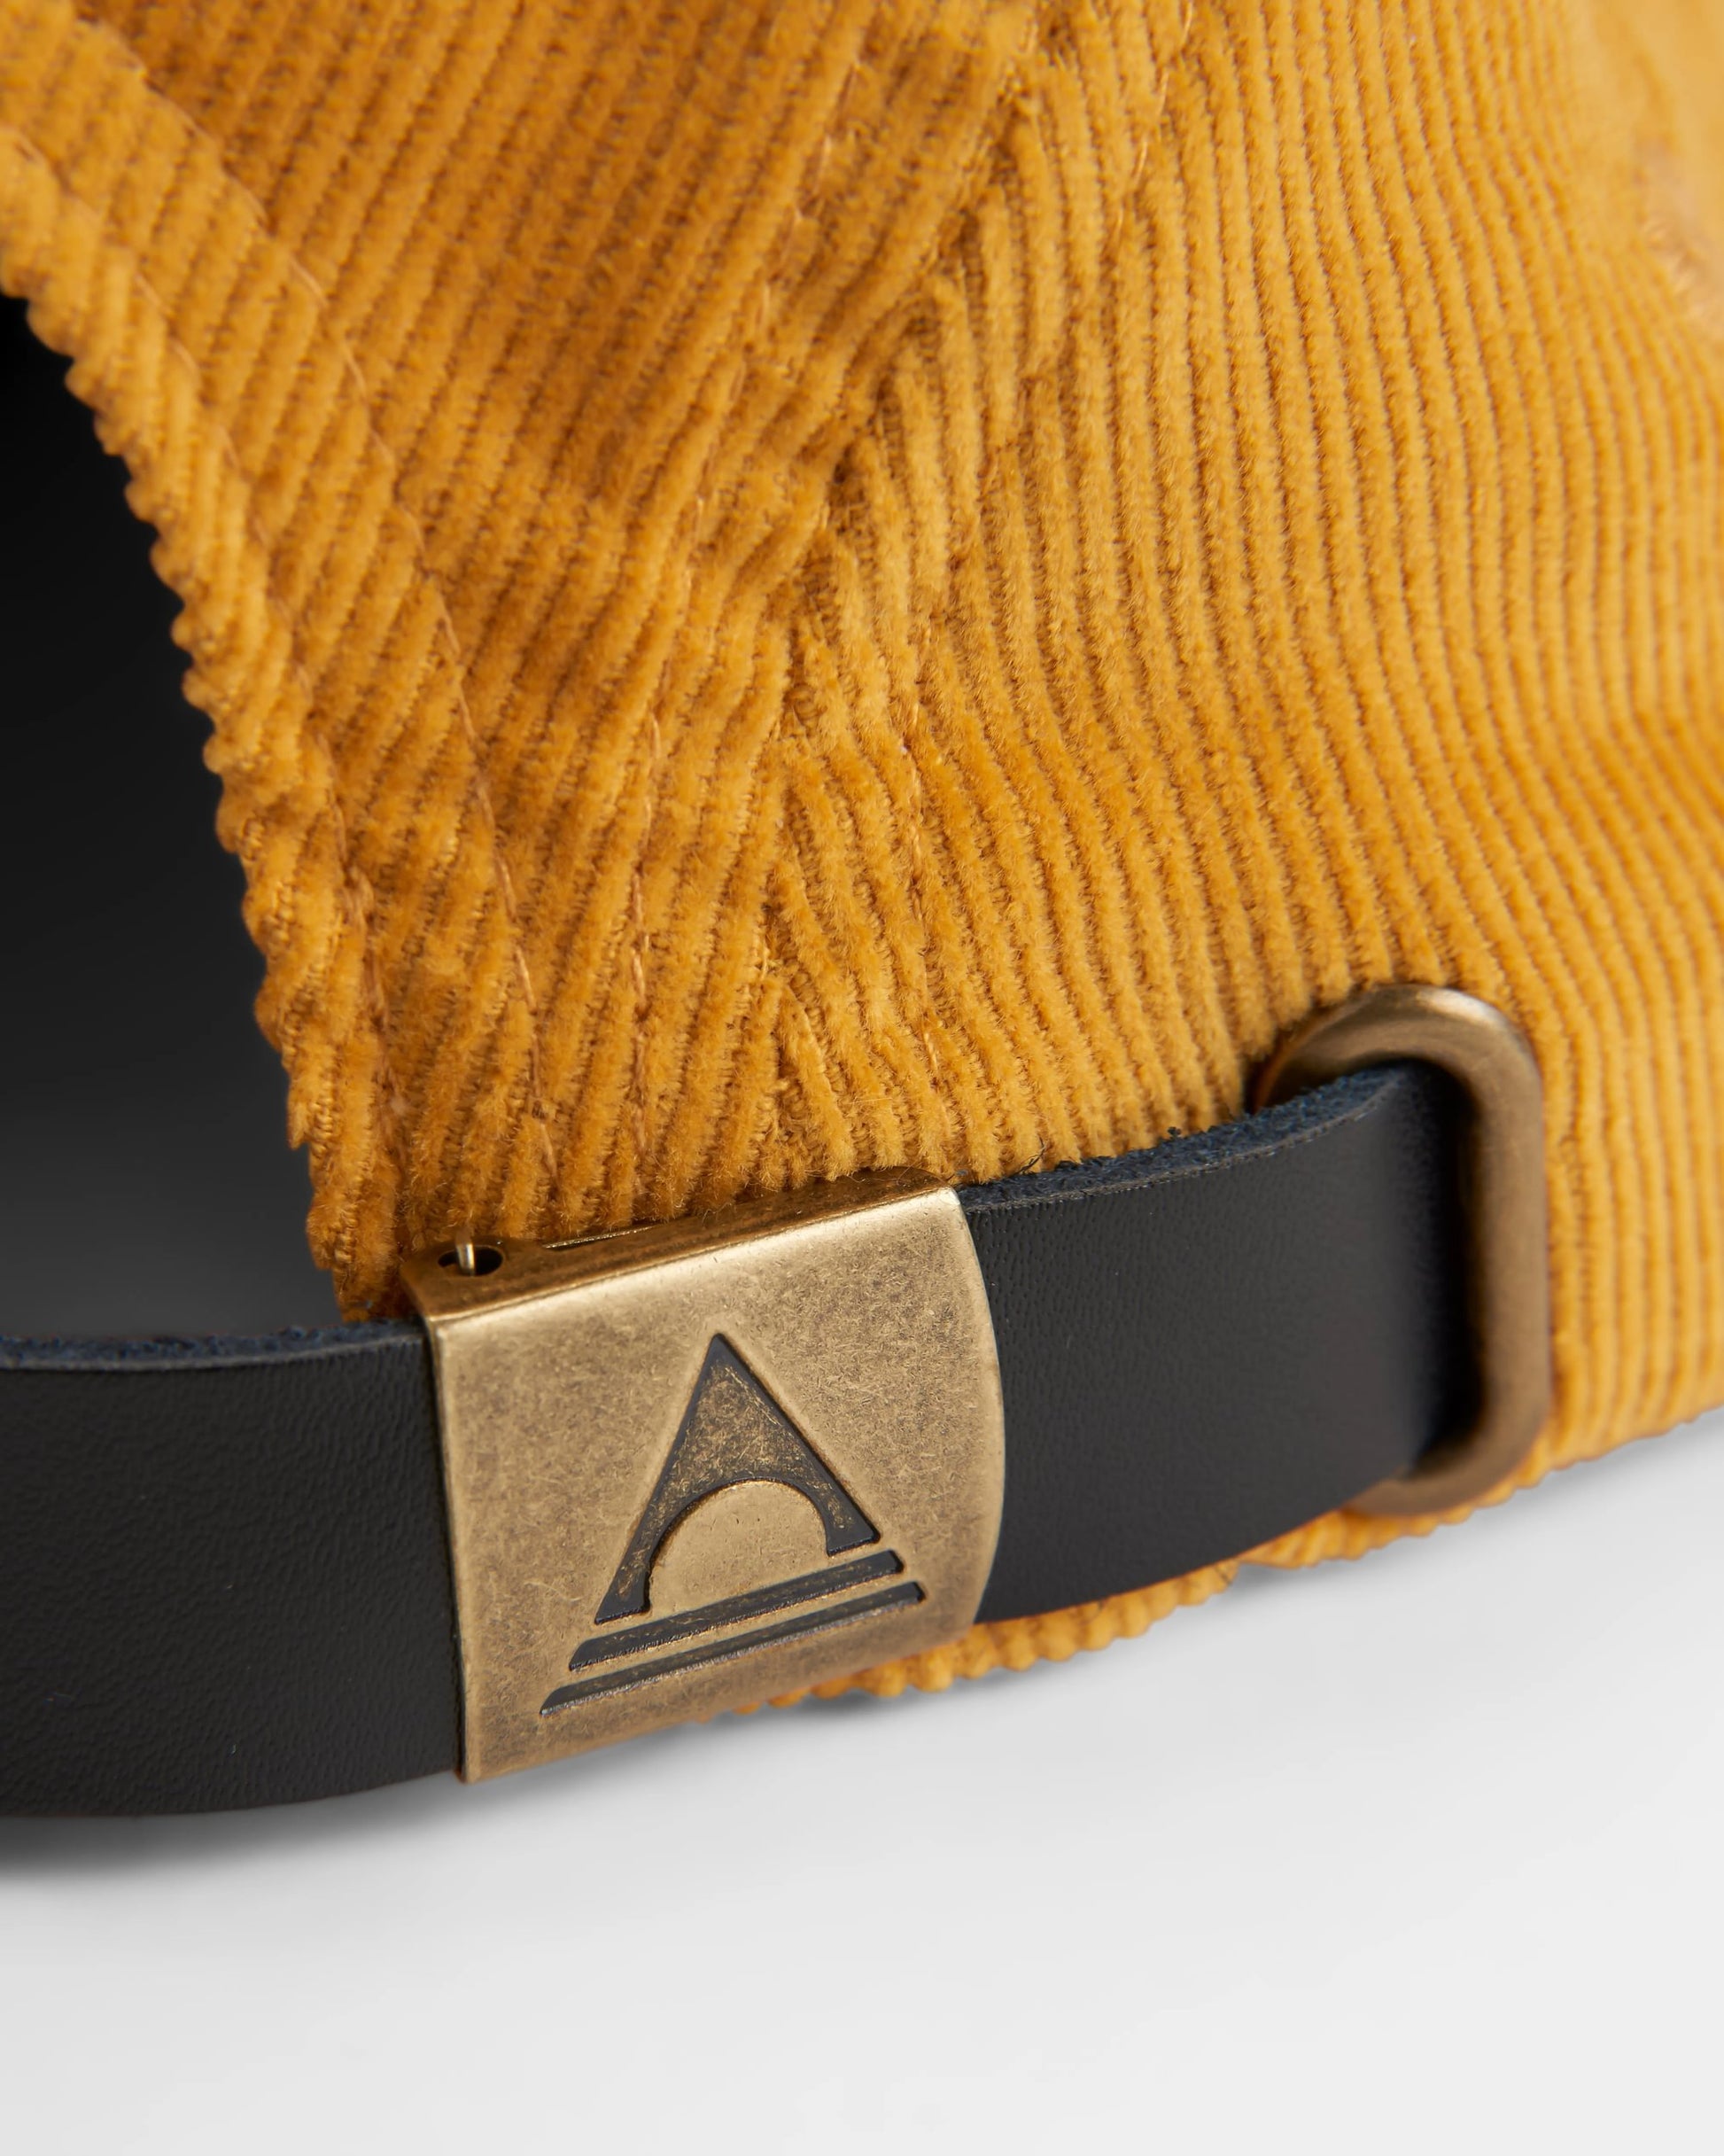 Fixie 5 Panel Recycled Cord Cap - Golden Spice